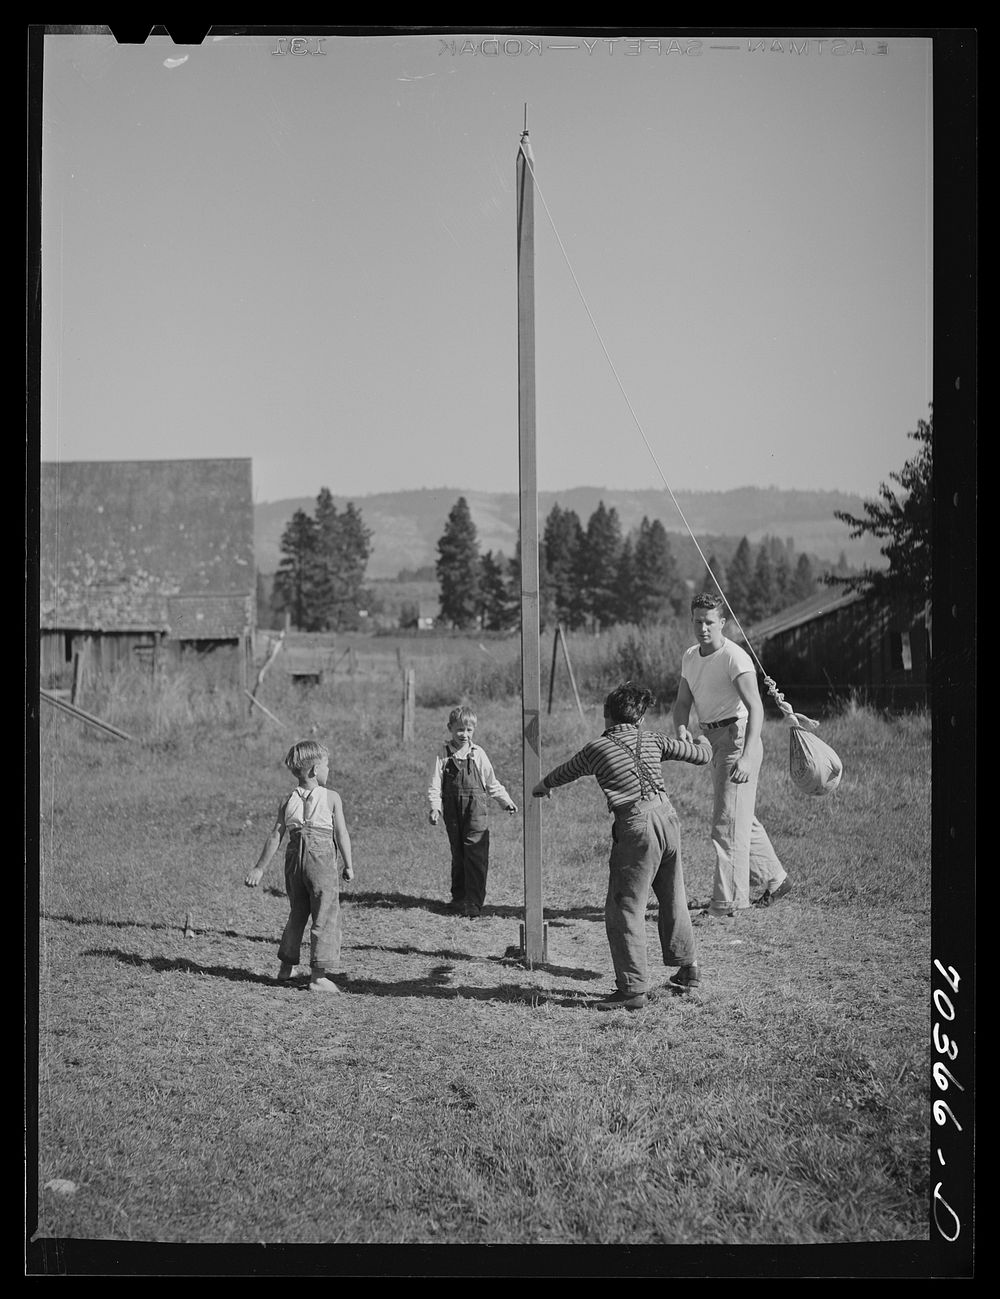 Playtime at the FSA (Farm Security Administration) mobile camp for migratory farm workers. Odell, Oregon by Russell Lee